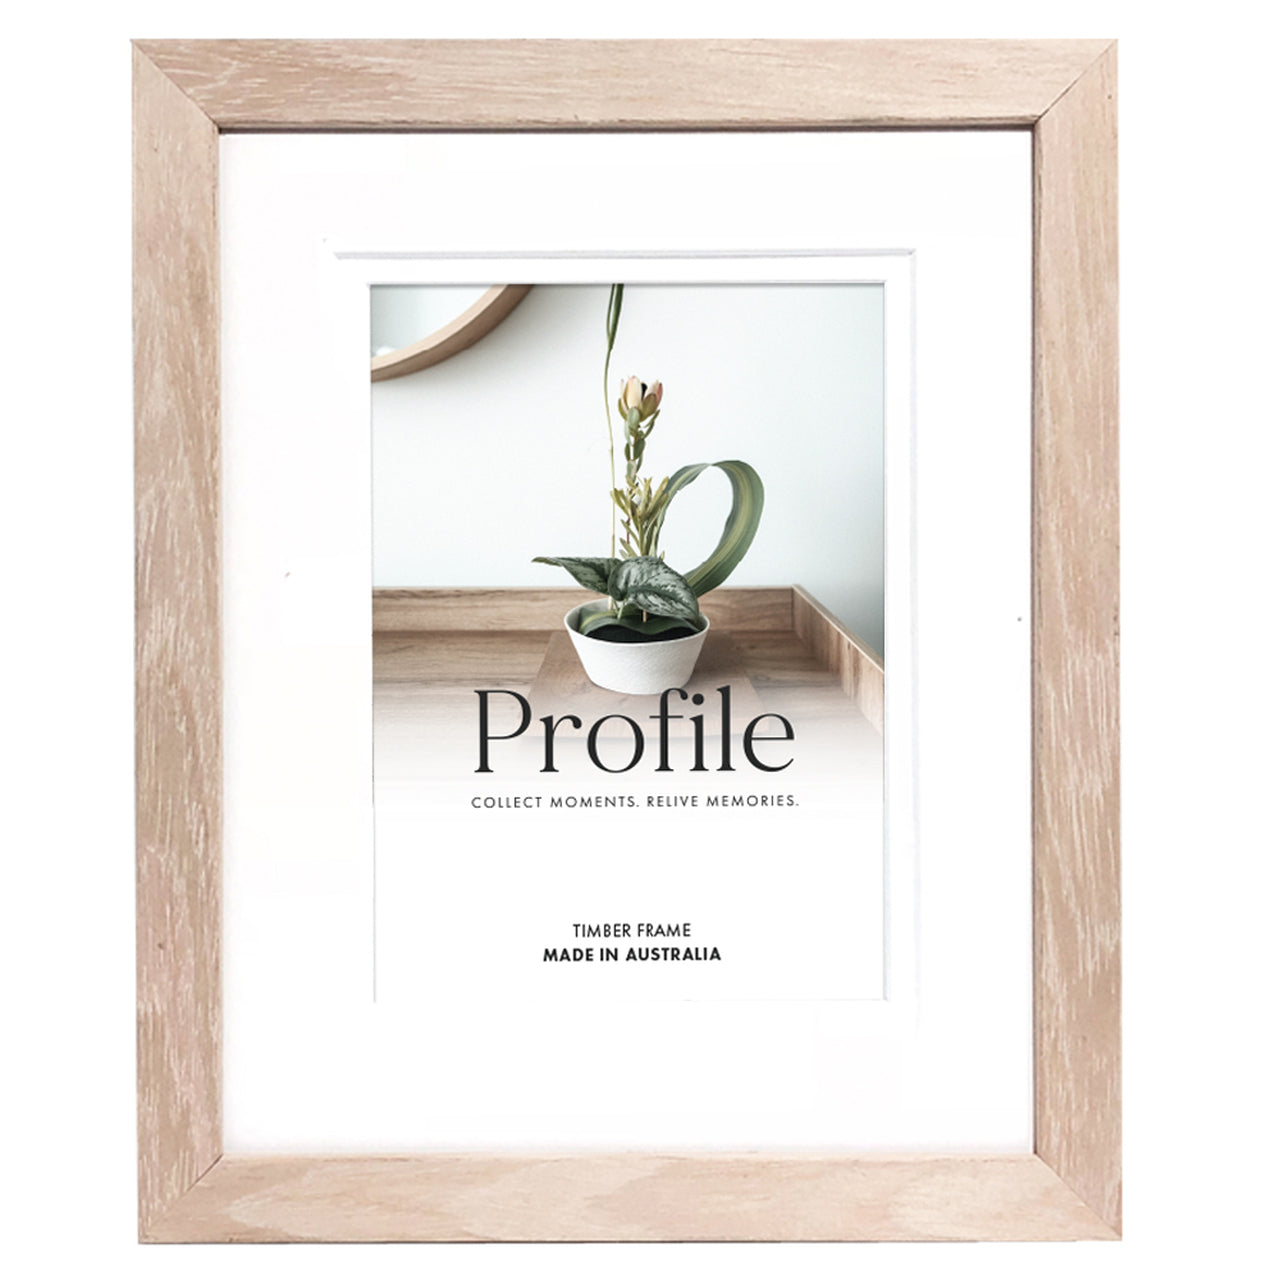 Deluxe Polar Birch 10x12 Photo Frame with 6x8 opening